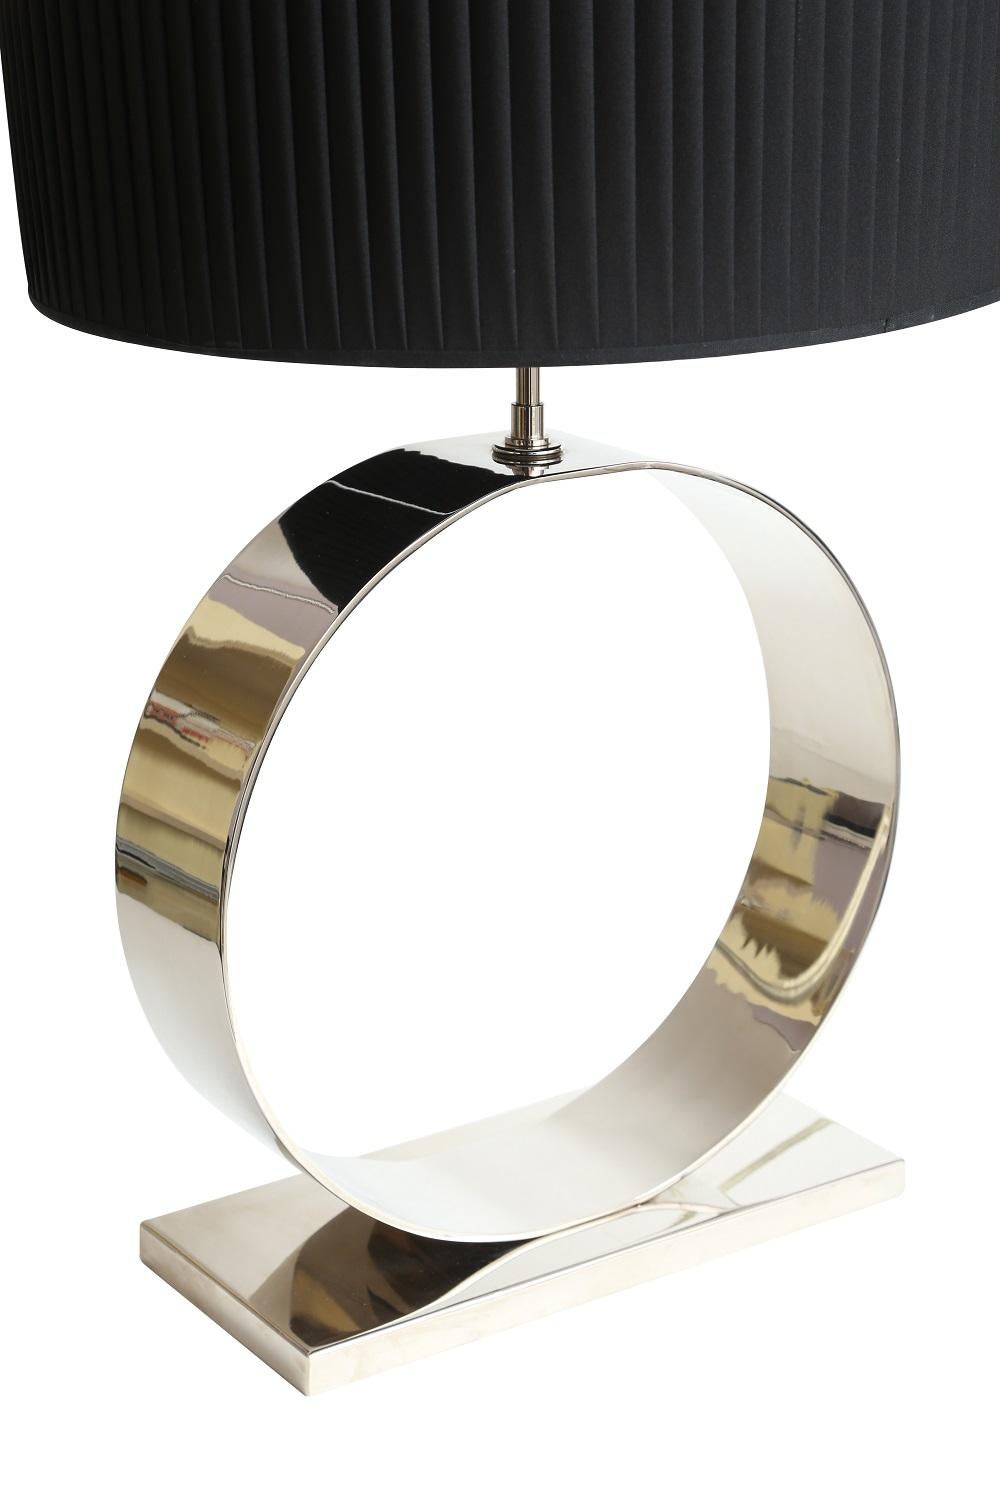 Modern table lamp by Selezioni Domus with a chrome base and black shade.

Dimensions:
Without shade: 16